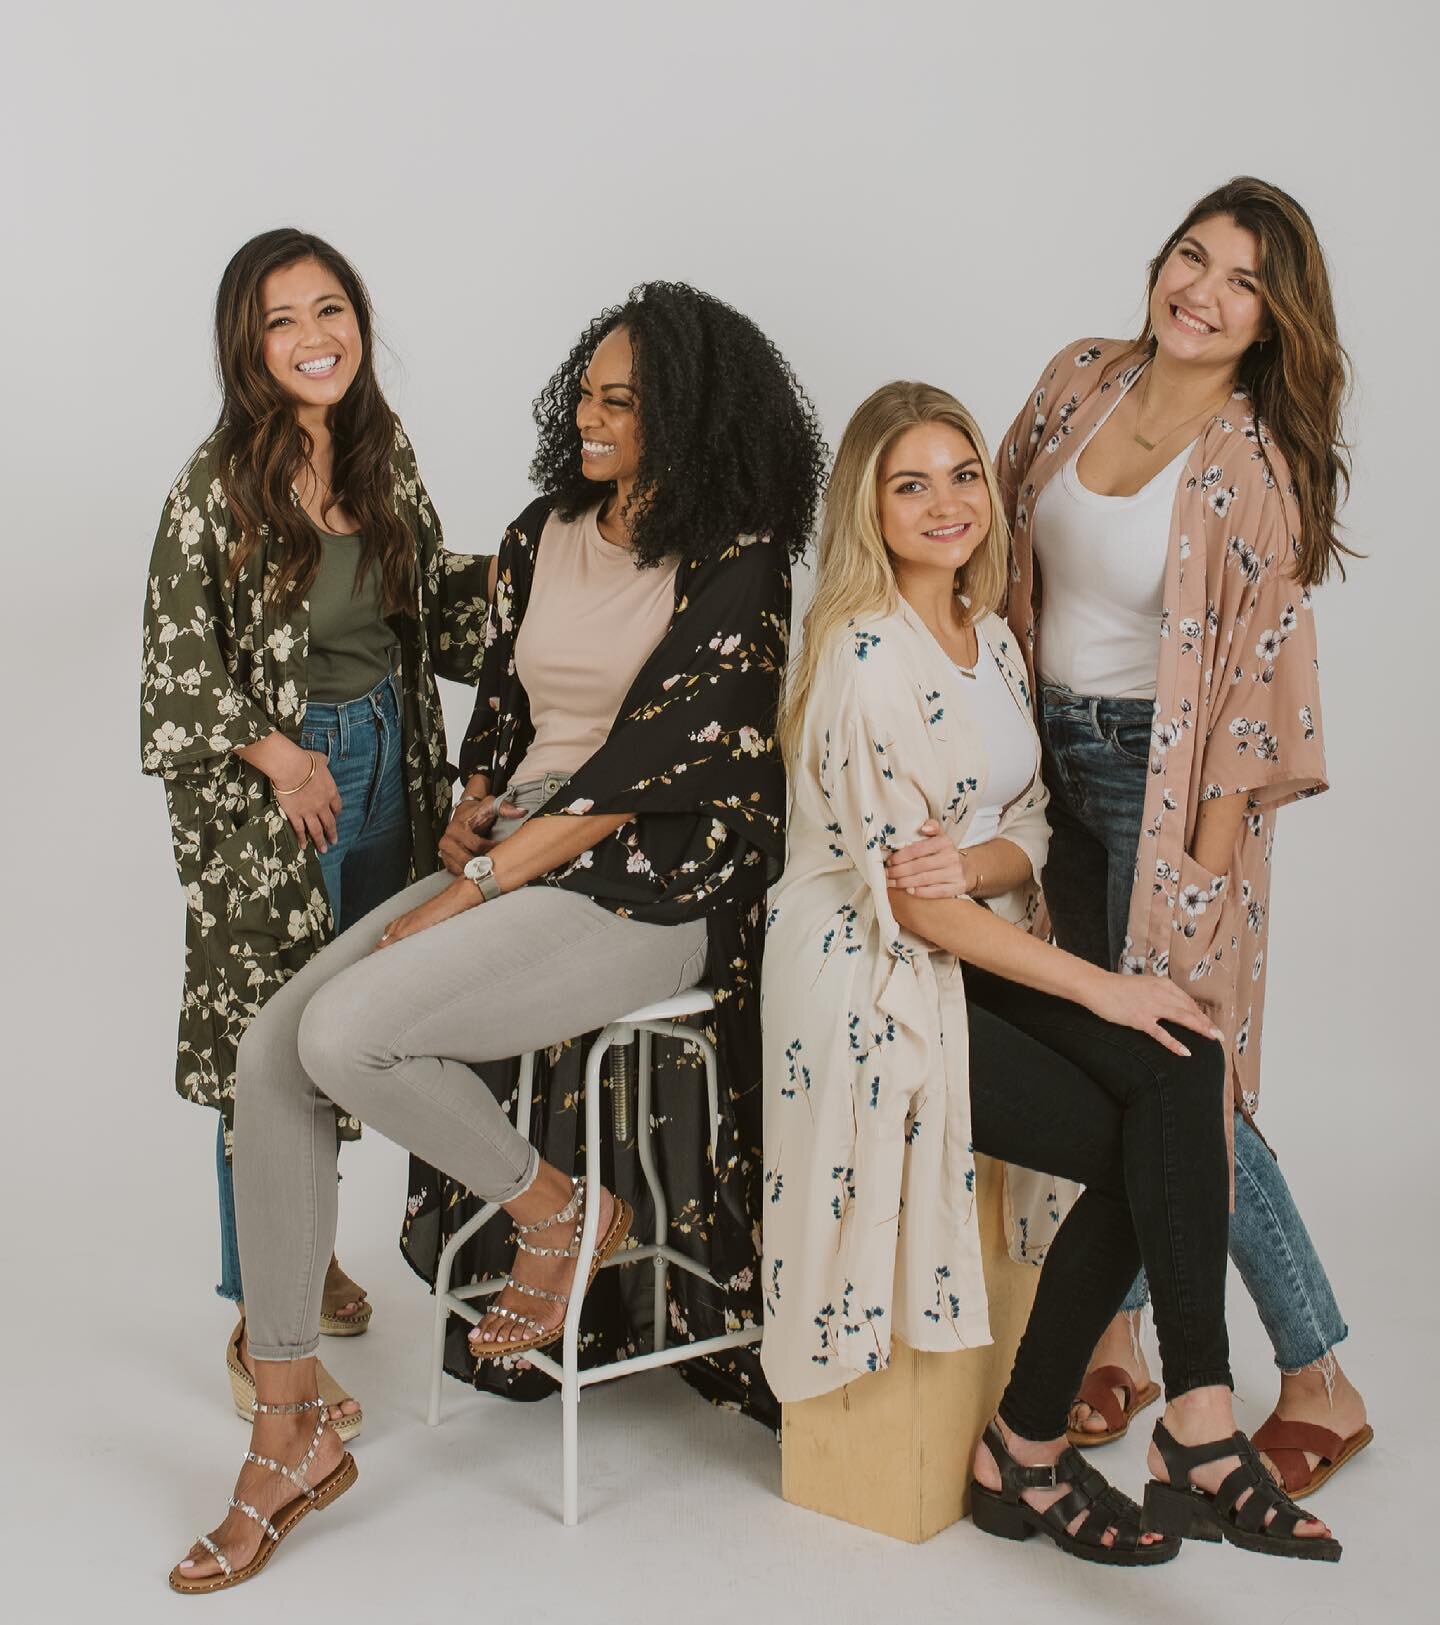 If you&rsquo;re on the hunt for Mother&rsquo;s Day gifts, definitely visit @our.anthem for kimonos, hair accessories, and jewelry. 

It was an honor to photograph this campaign for their new product line, all made by survivors of human trafficking. T